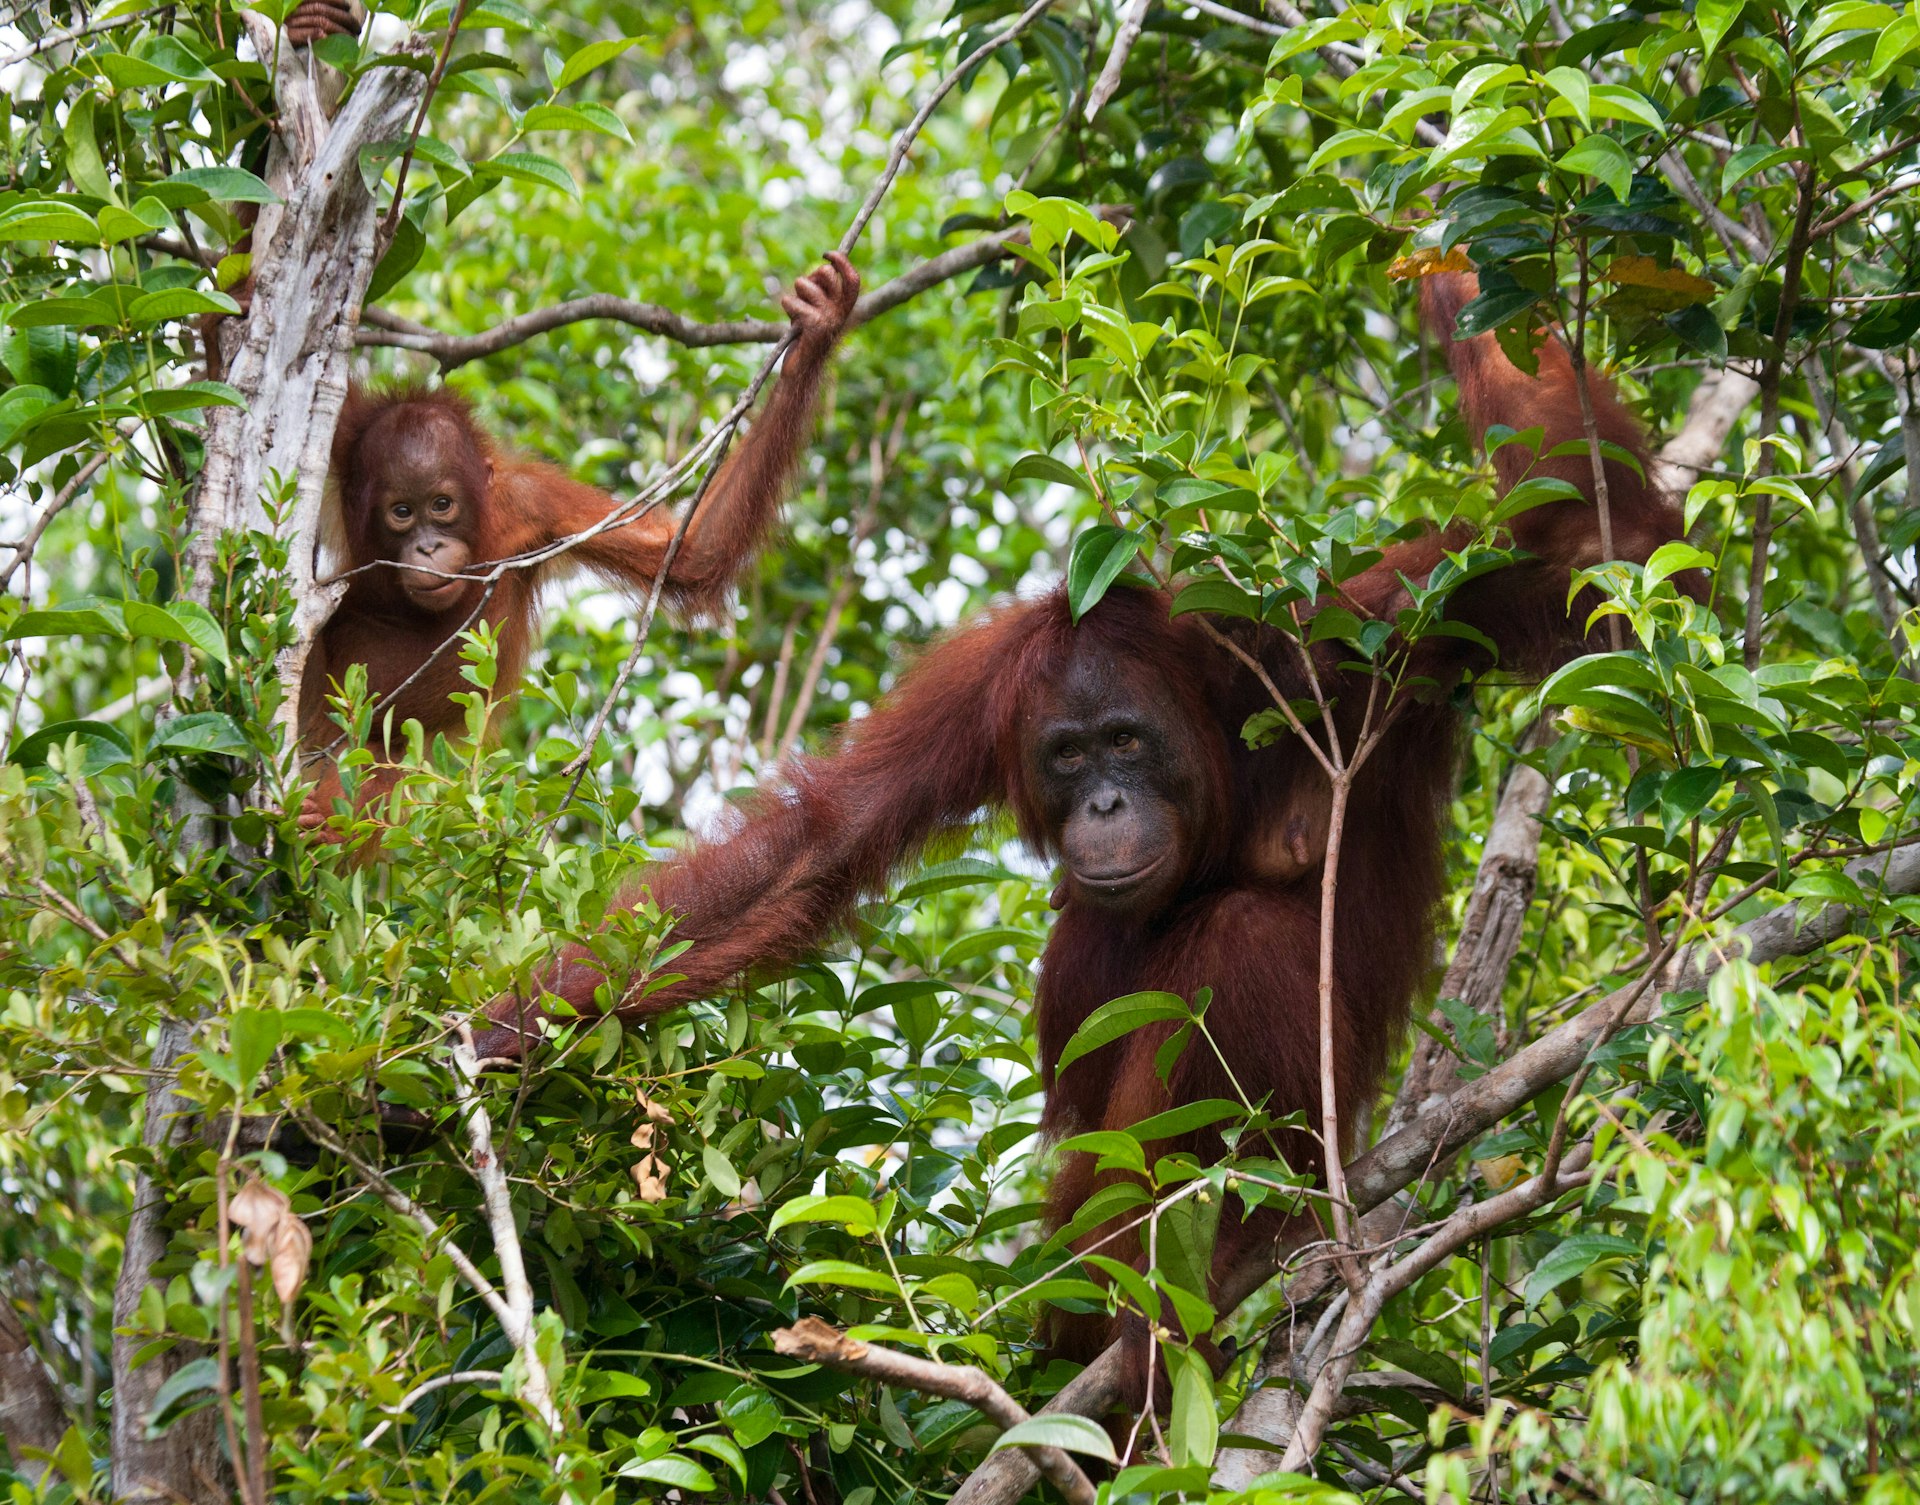 A female of the orangutan with a baby in a tree